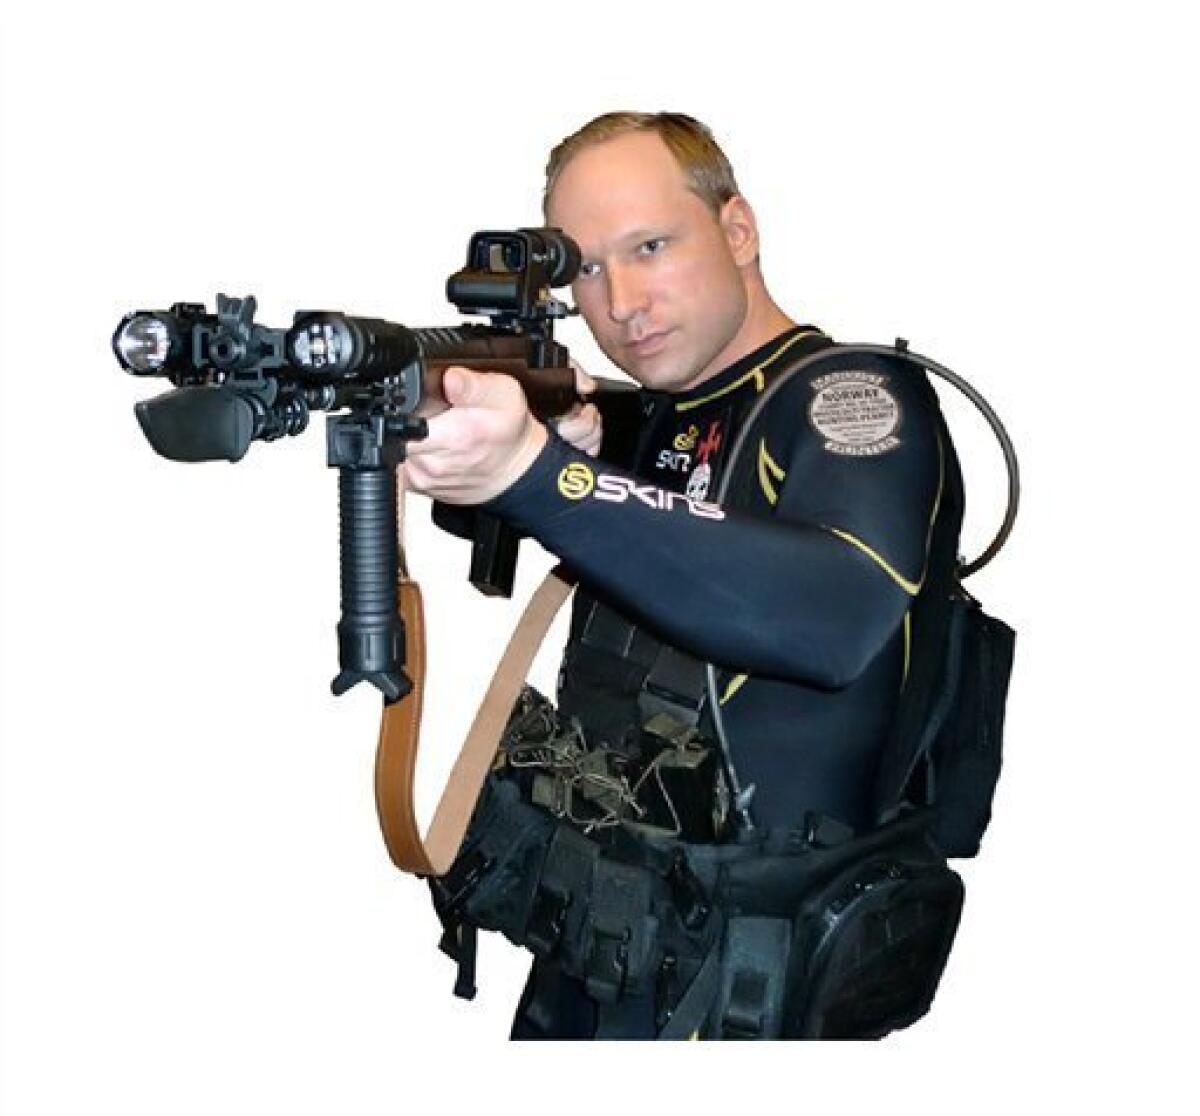 EDS NOTE: IMAGE HAS BEEN DIGITALLY ALTERED BY THE ORIGINAL SOURCE TO REMOVE THE BACKGROUND - This image shows Anders Behring Breivik from a manifesto attributed to him that was discovered Saturday, July 23, 2011. Breivik is a suspect in a bombing in Oslo and a shooting on a nearby island which occurred on Friday, July 22, 2011. The Norwegian news agency NTB said Breivik wrote a 1,500-page manifesto before the attack in which he attacked multiculturalism and Muslim immigration. The document, which contained this and other photos, also described how to acquire explosives. (AP Photo/via Scanpix)